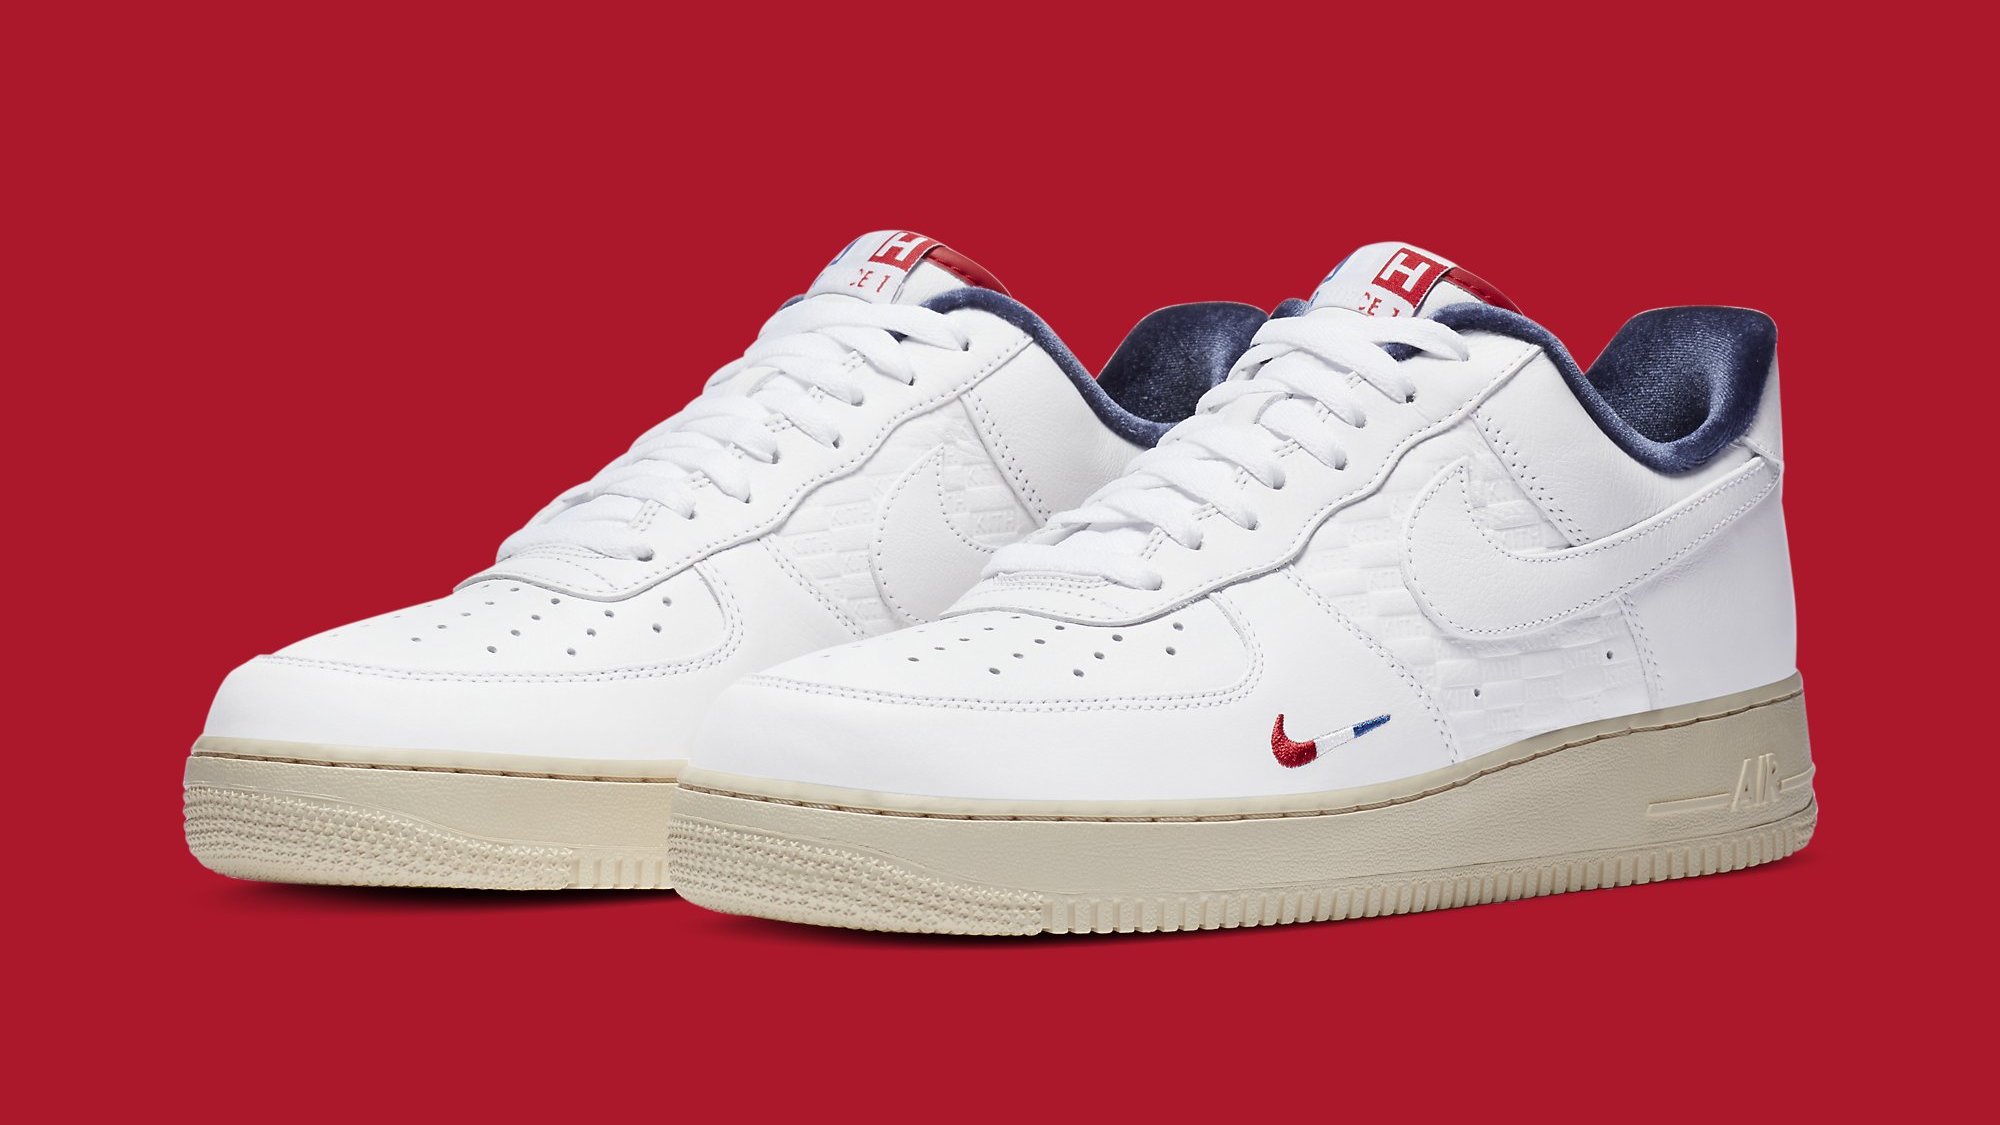 Kith's New Nike Air Force 1 Collab Is Releasing Exclusively in ...